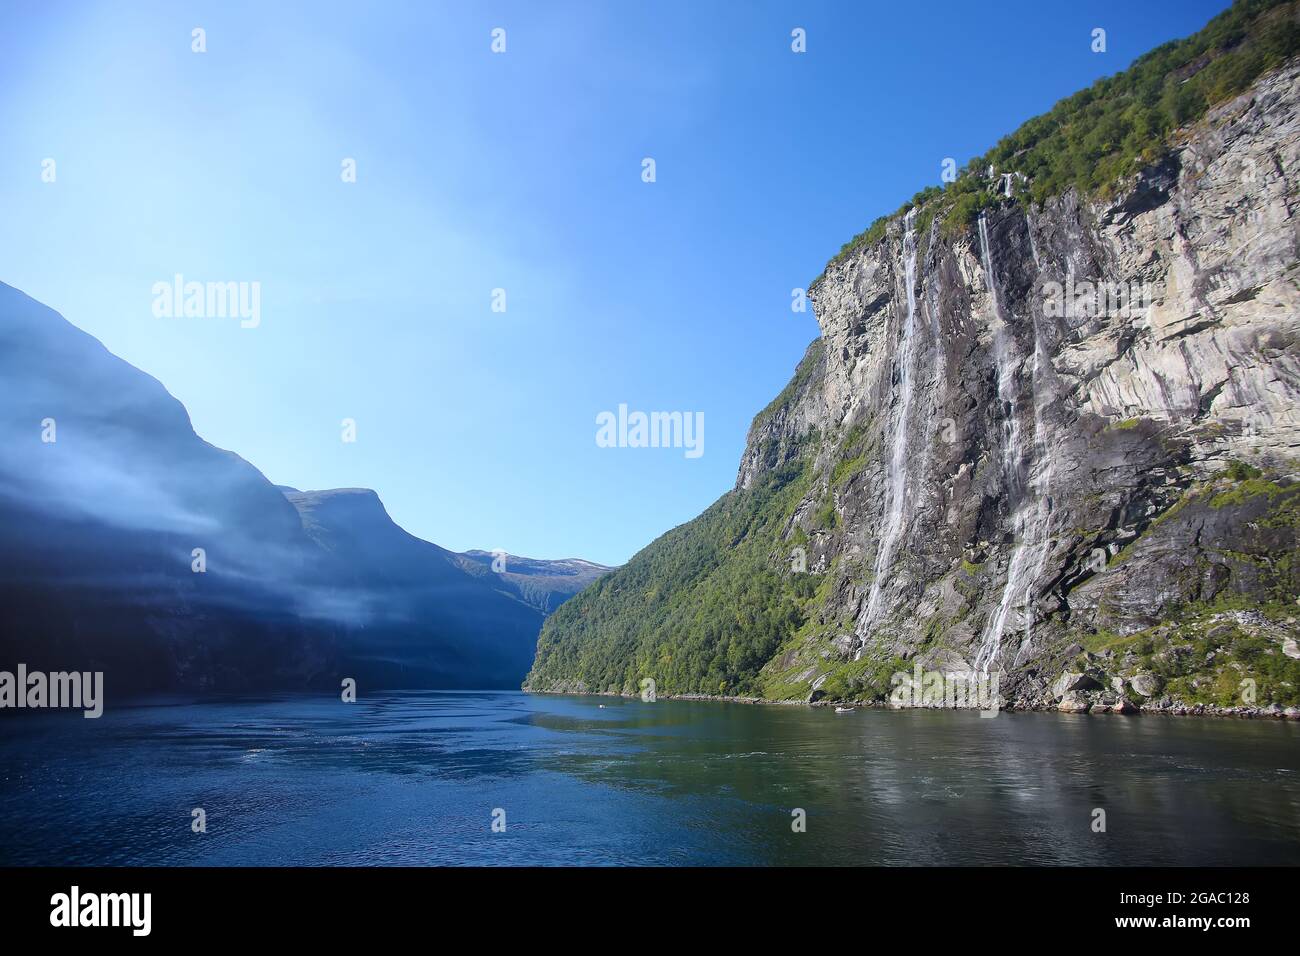 The Seven Sisters waterfall which is one of the tallest in Norway.  Beautiful fjord landscape with cliffs either side. Geirangerfjord, Norway. Stock Photo